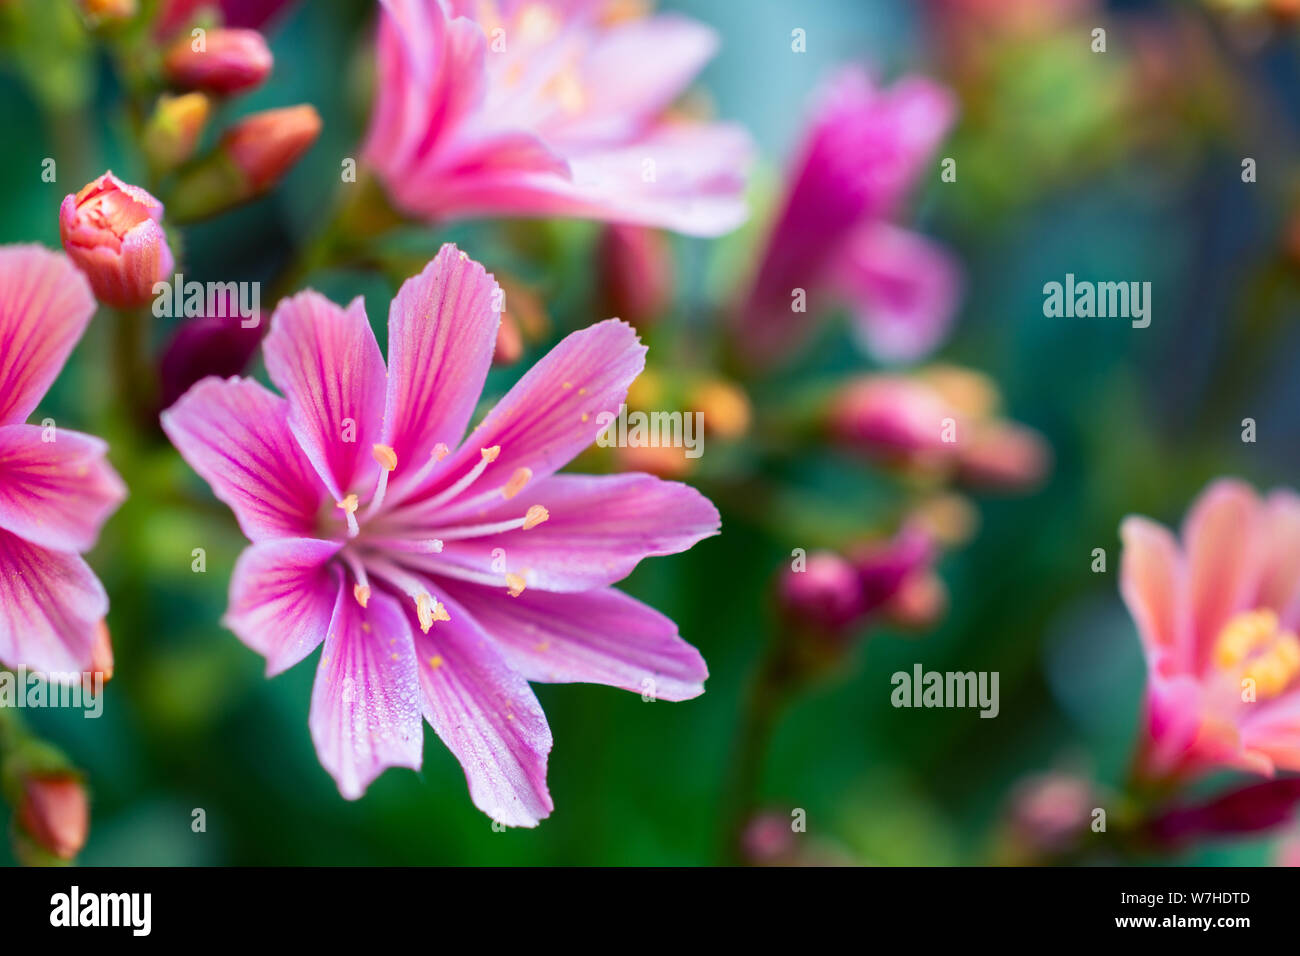 Lewisia plant, close-up of the pink flower Stock Photo